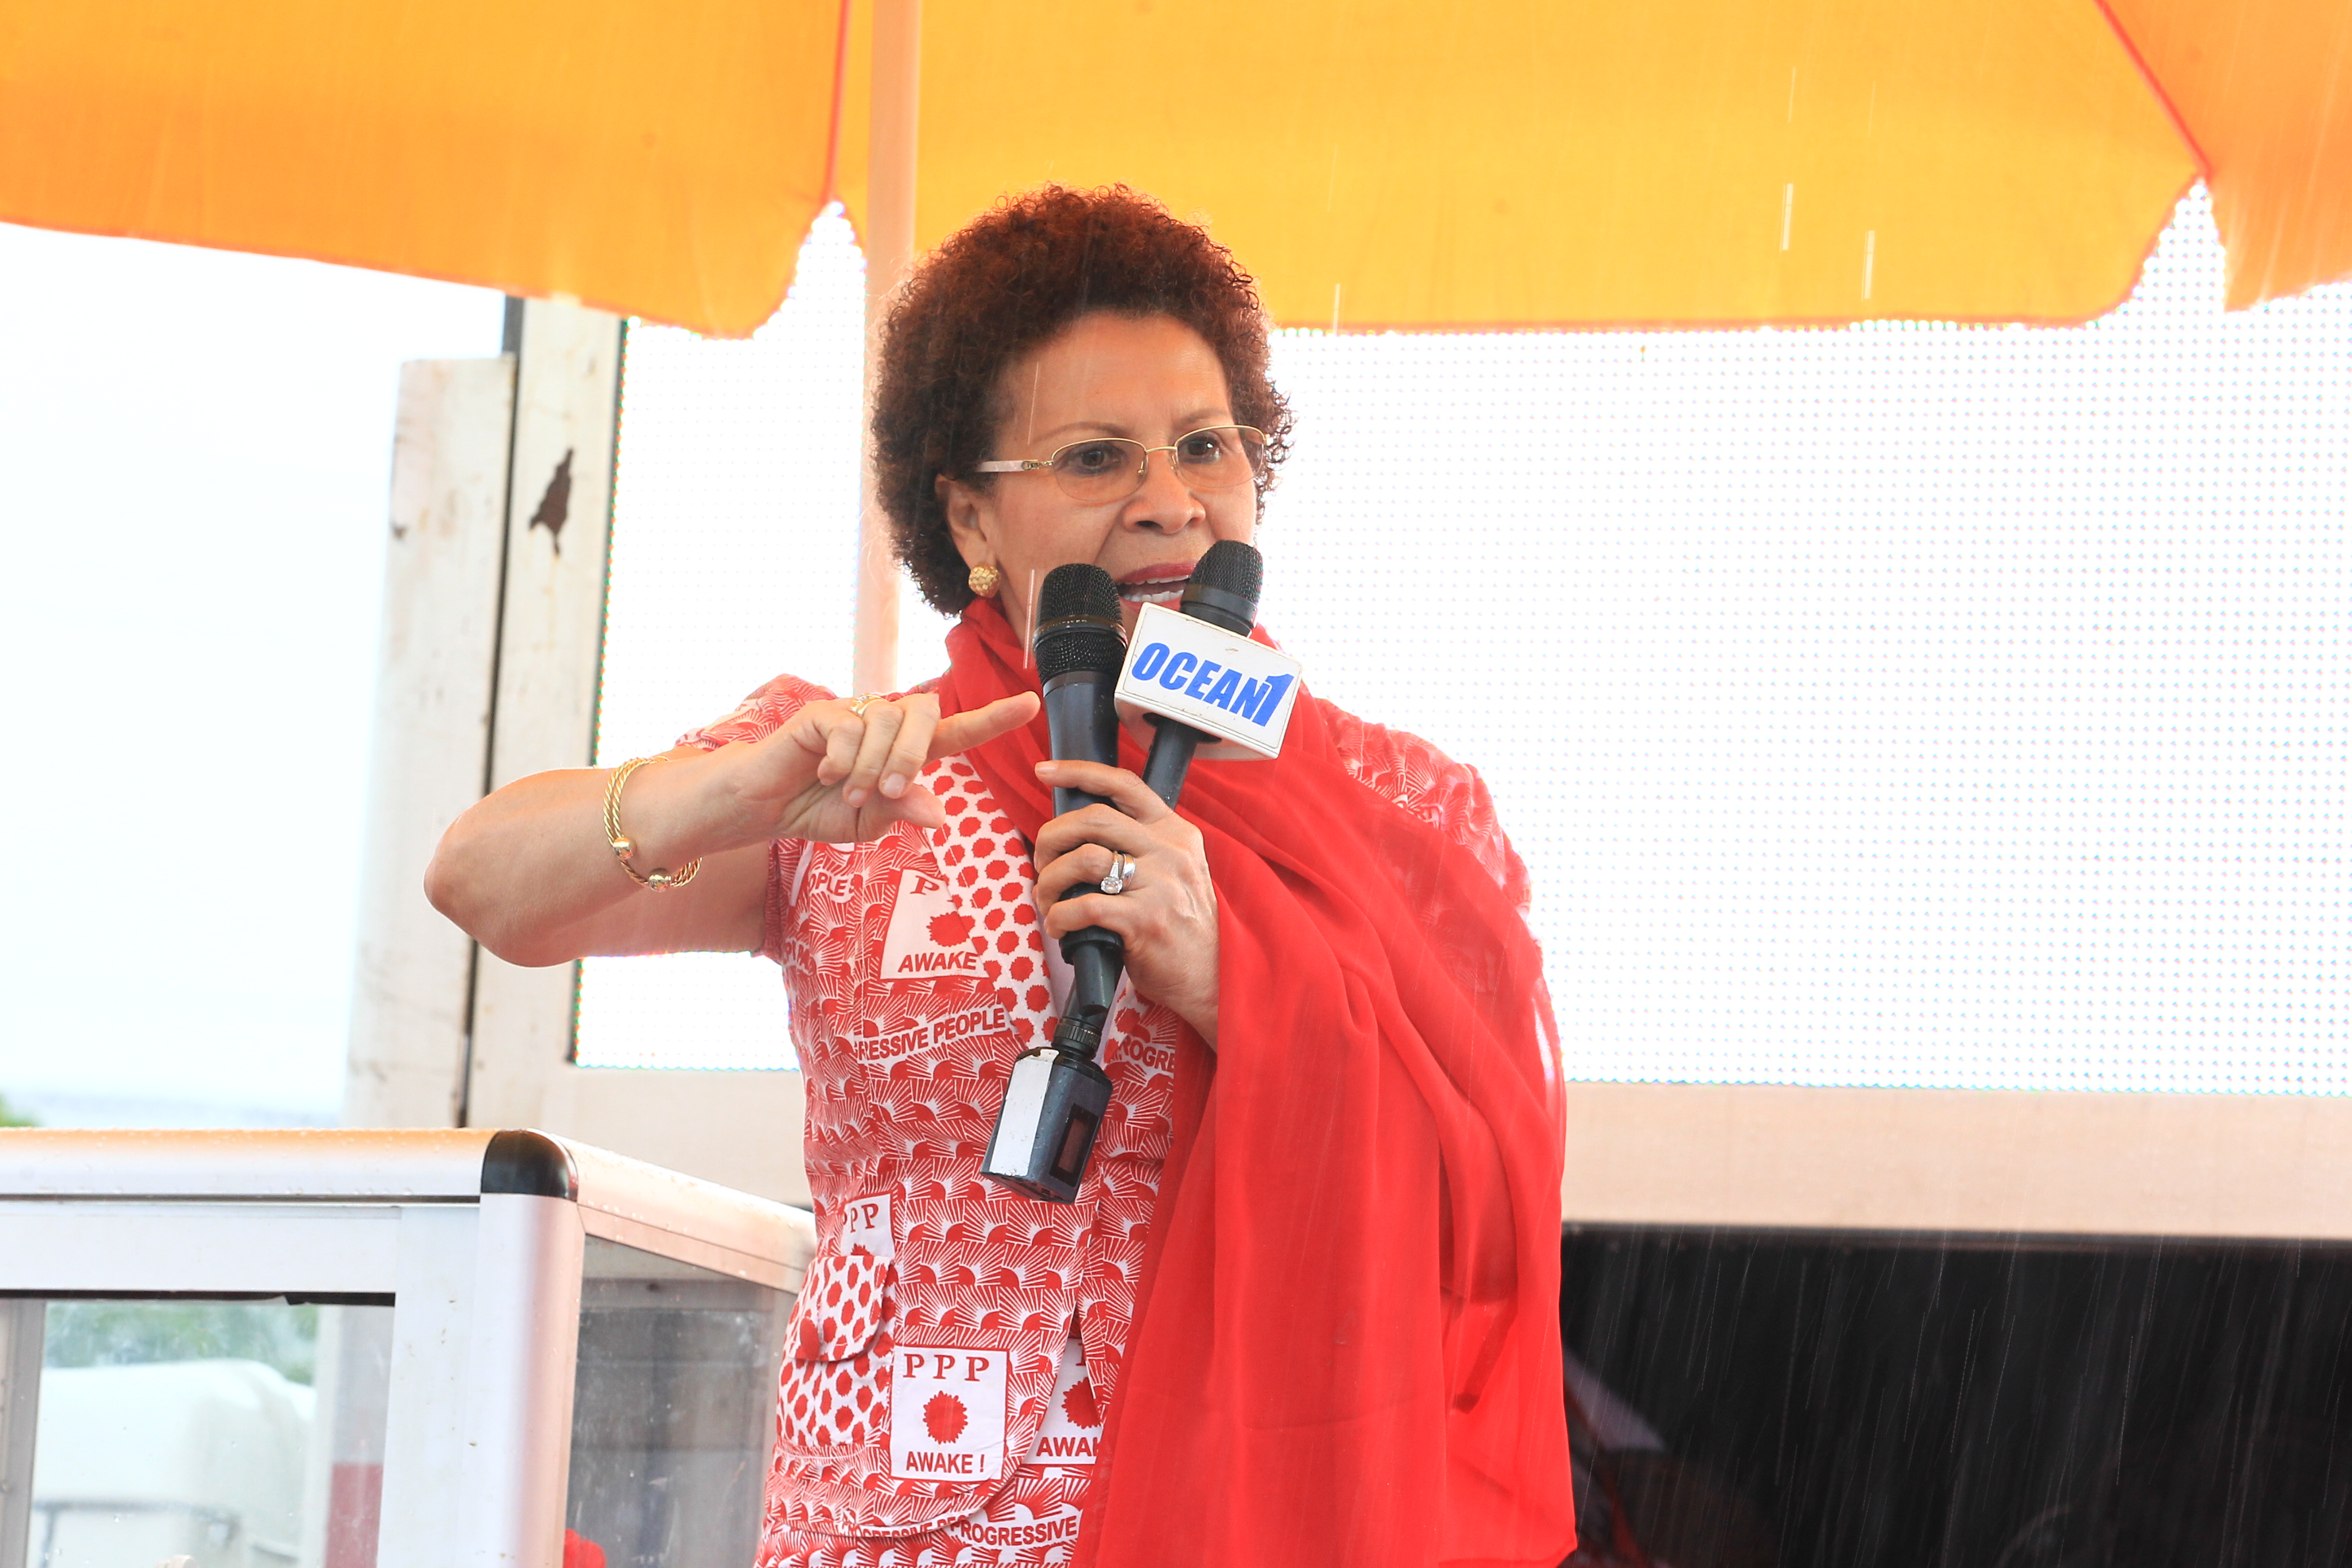 Educate your children to secure your pension – Mrs. Nduom urges